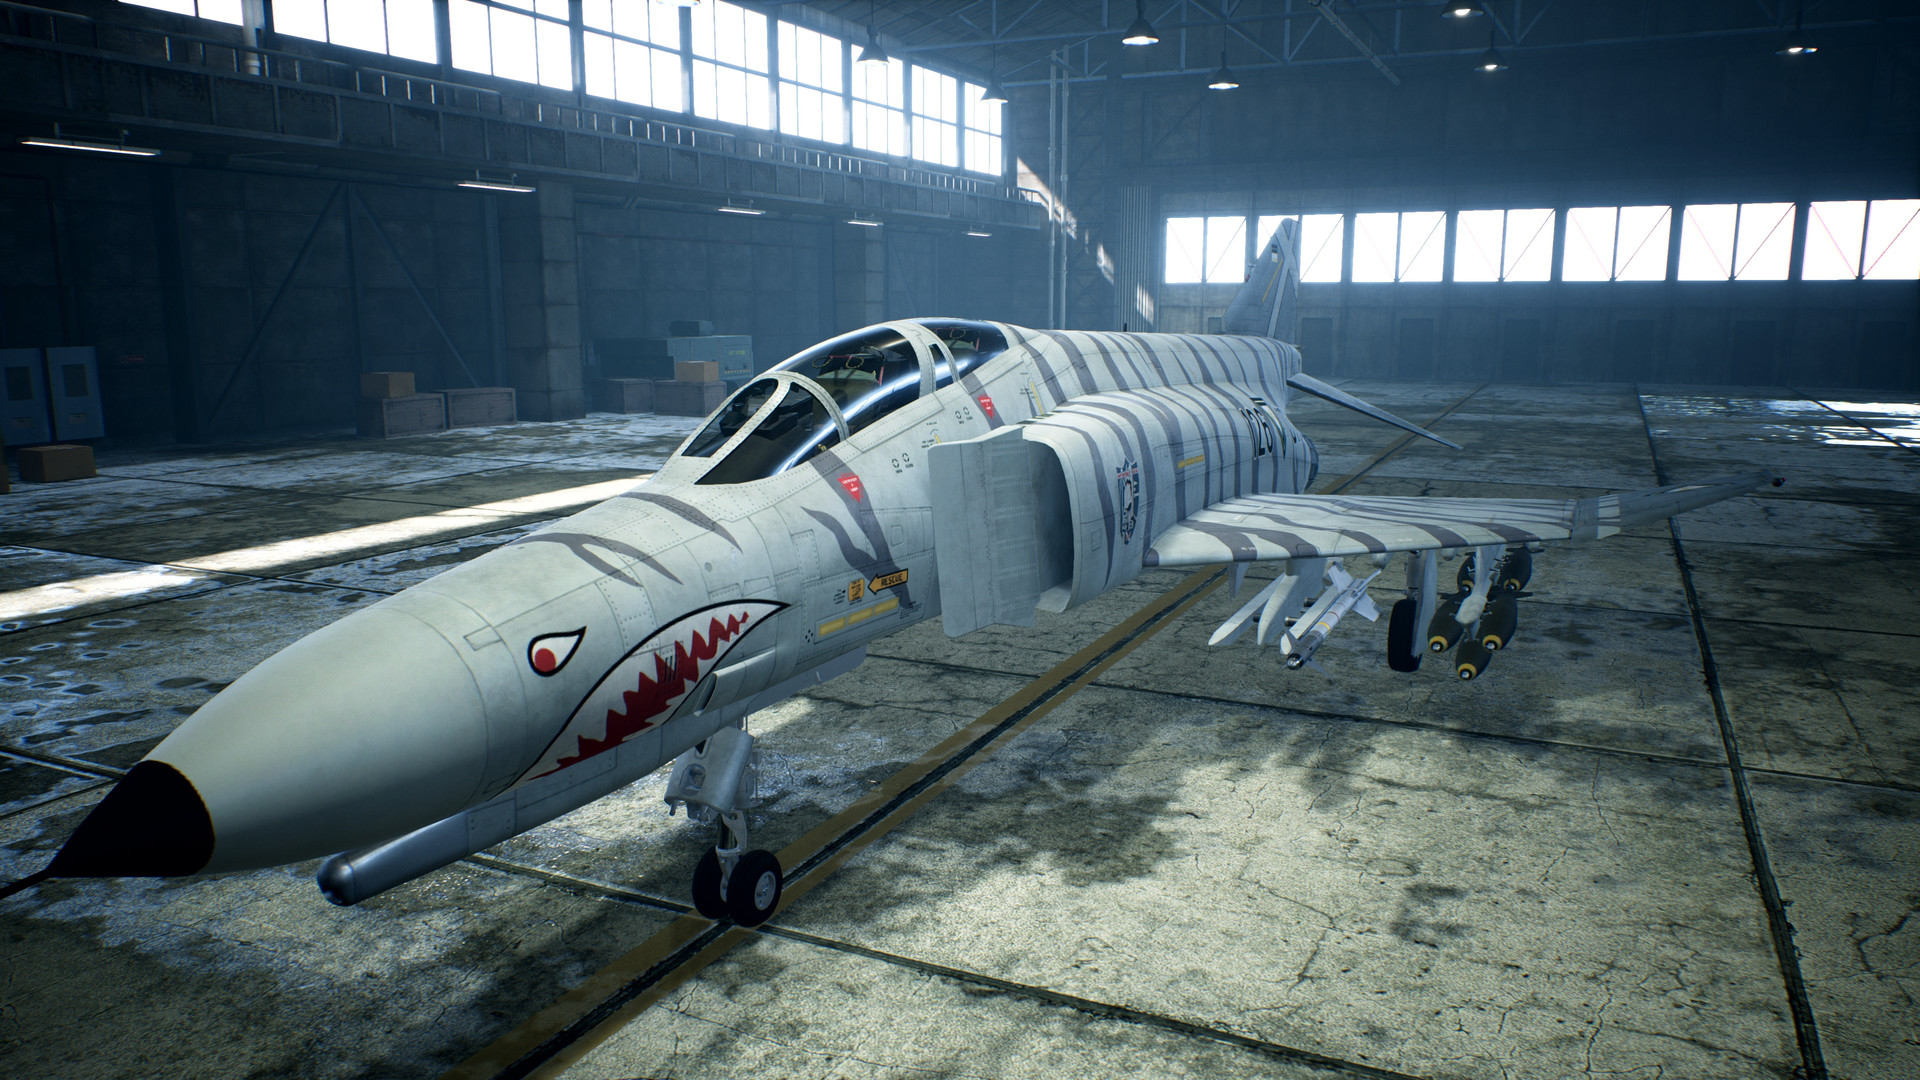 ACE COMBAT™ 7: SKIES UNKNOWN 25th Anniversary DLC - Cutting-Edge Aircraft  Series Set on Steam